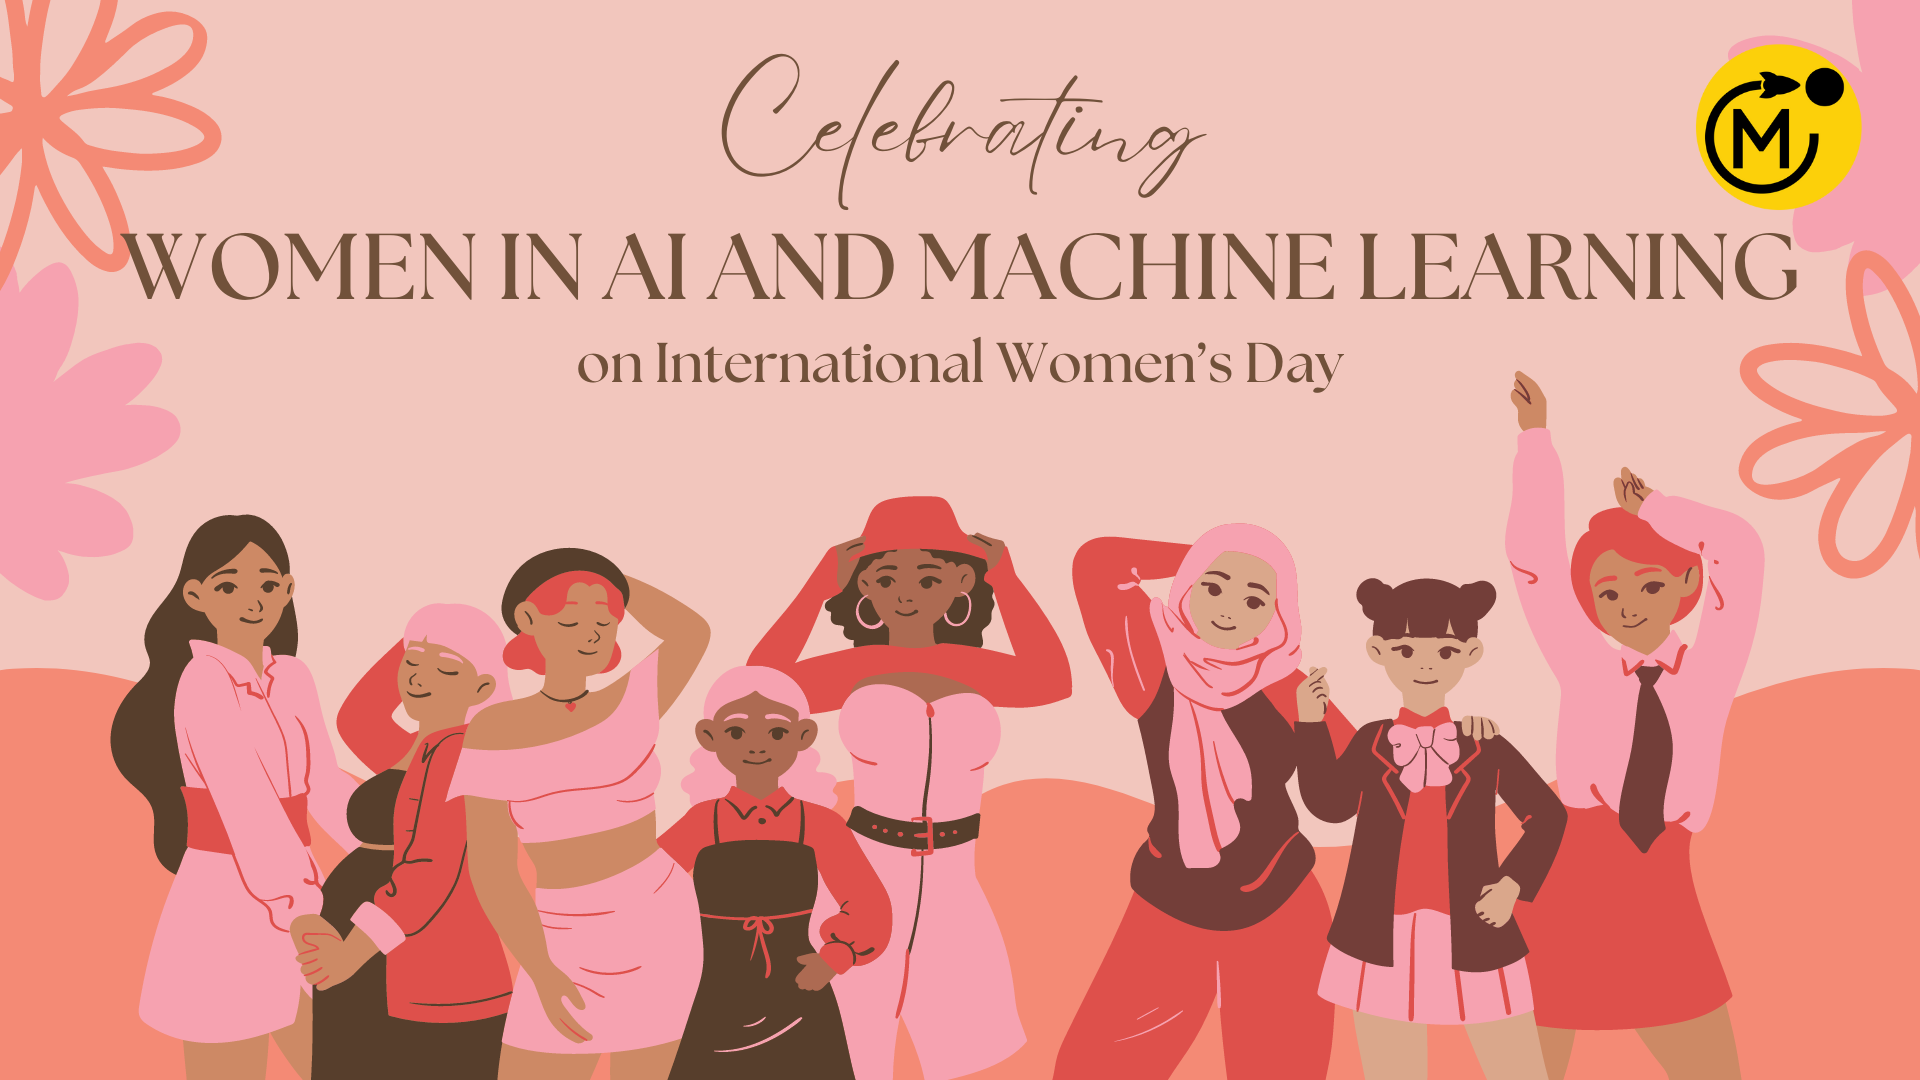 Celebrating Women in AI and Machine Learning on International Women’s Day